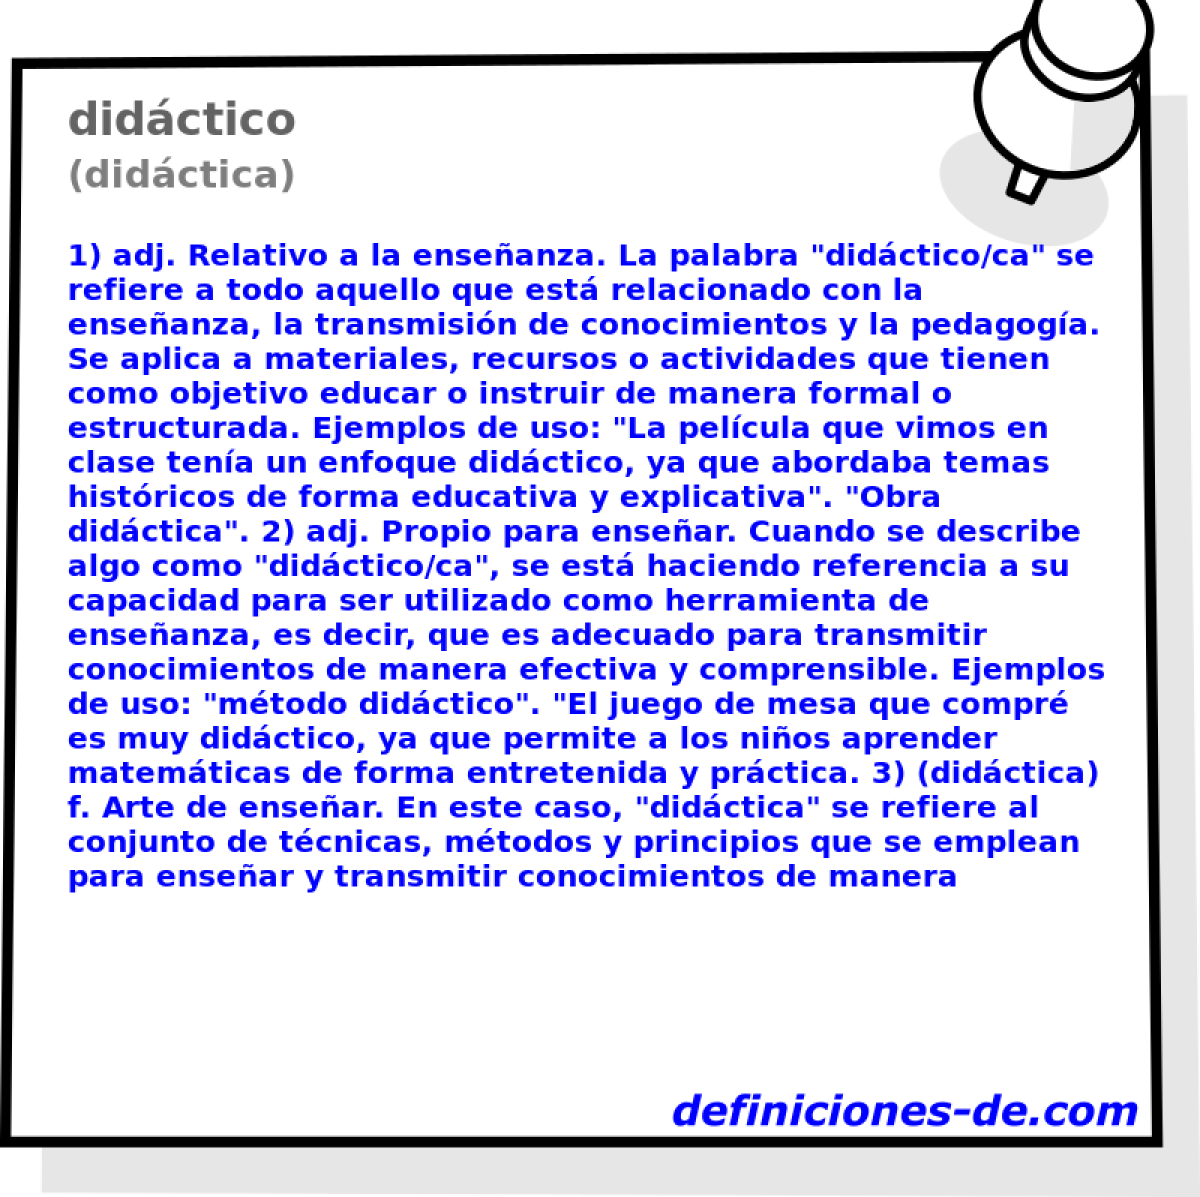 didctico (didctica)